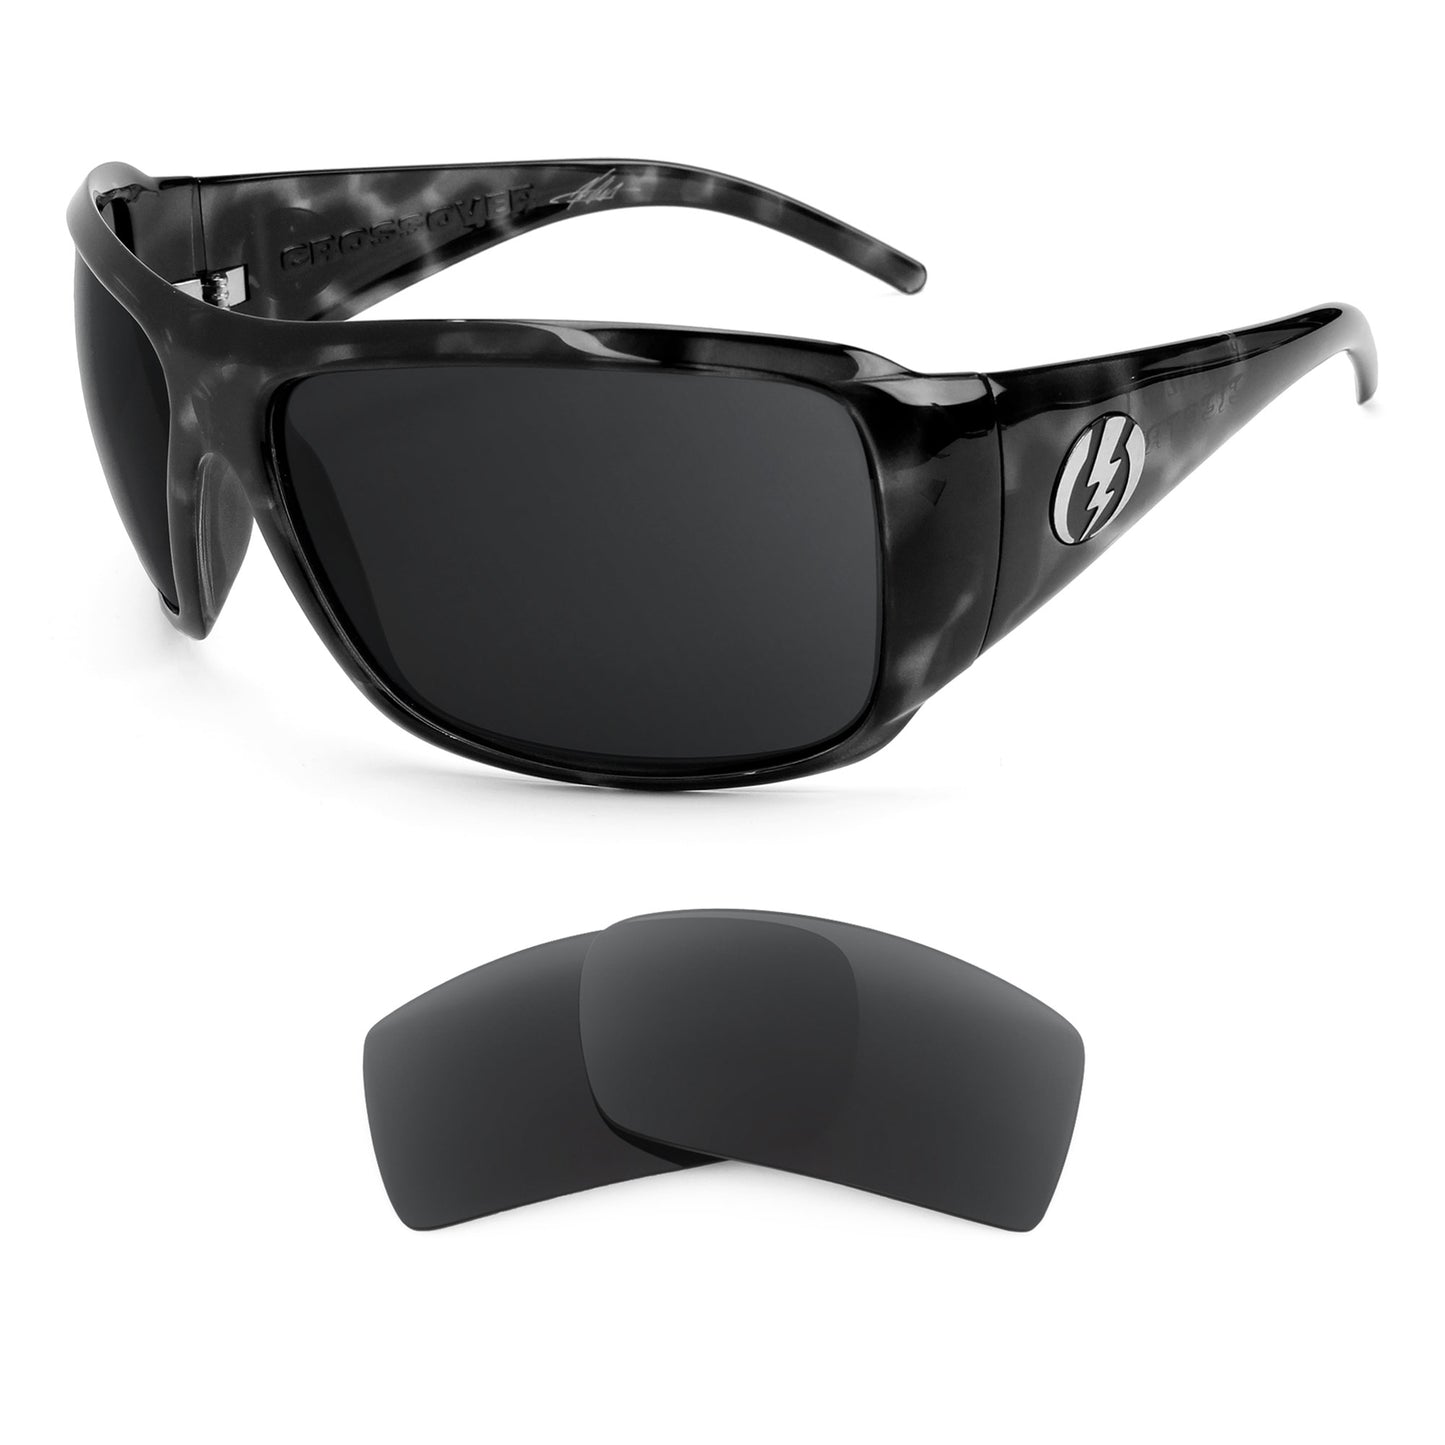 Electric Crossover sunglasses with replacement lenses